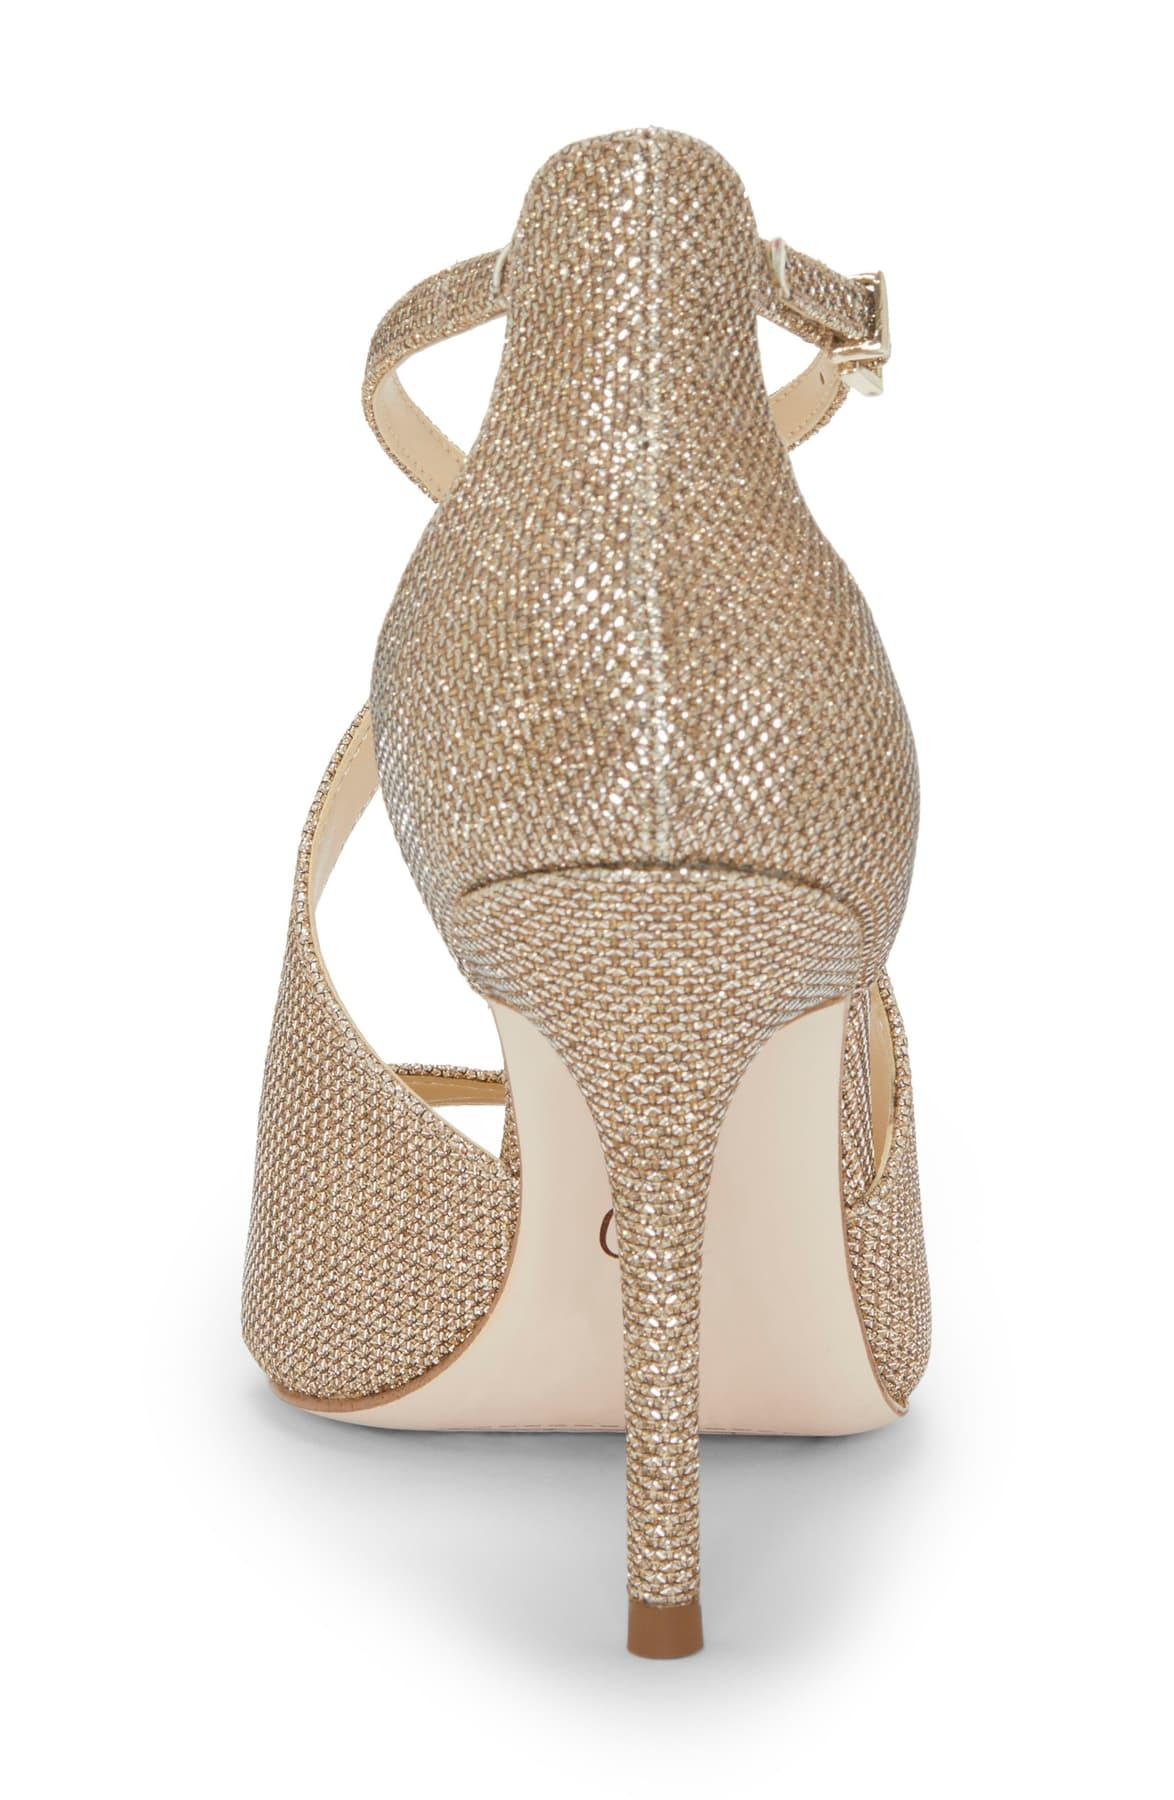 Jessica Simpson Avery Sandal in Gold 